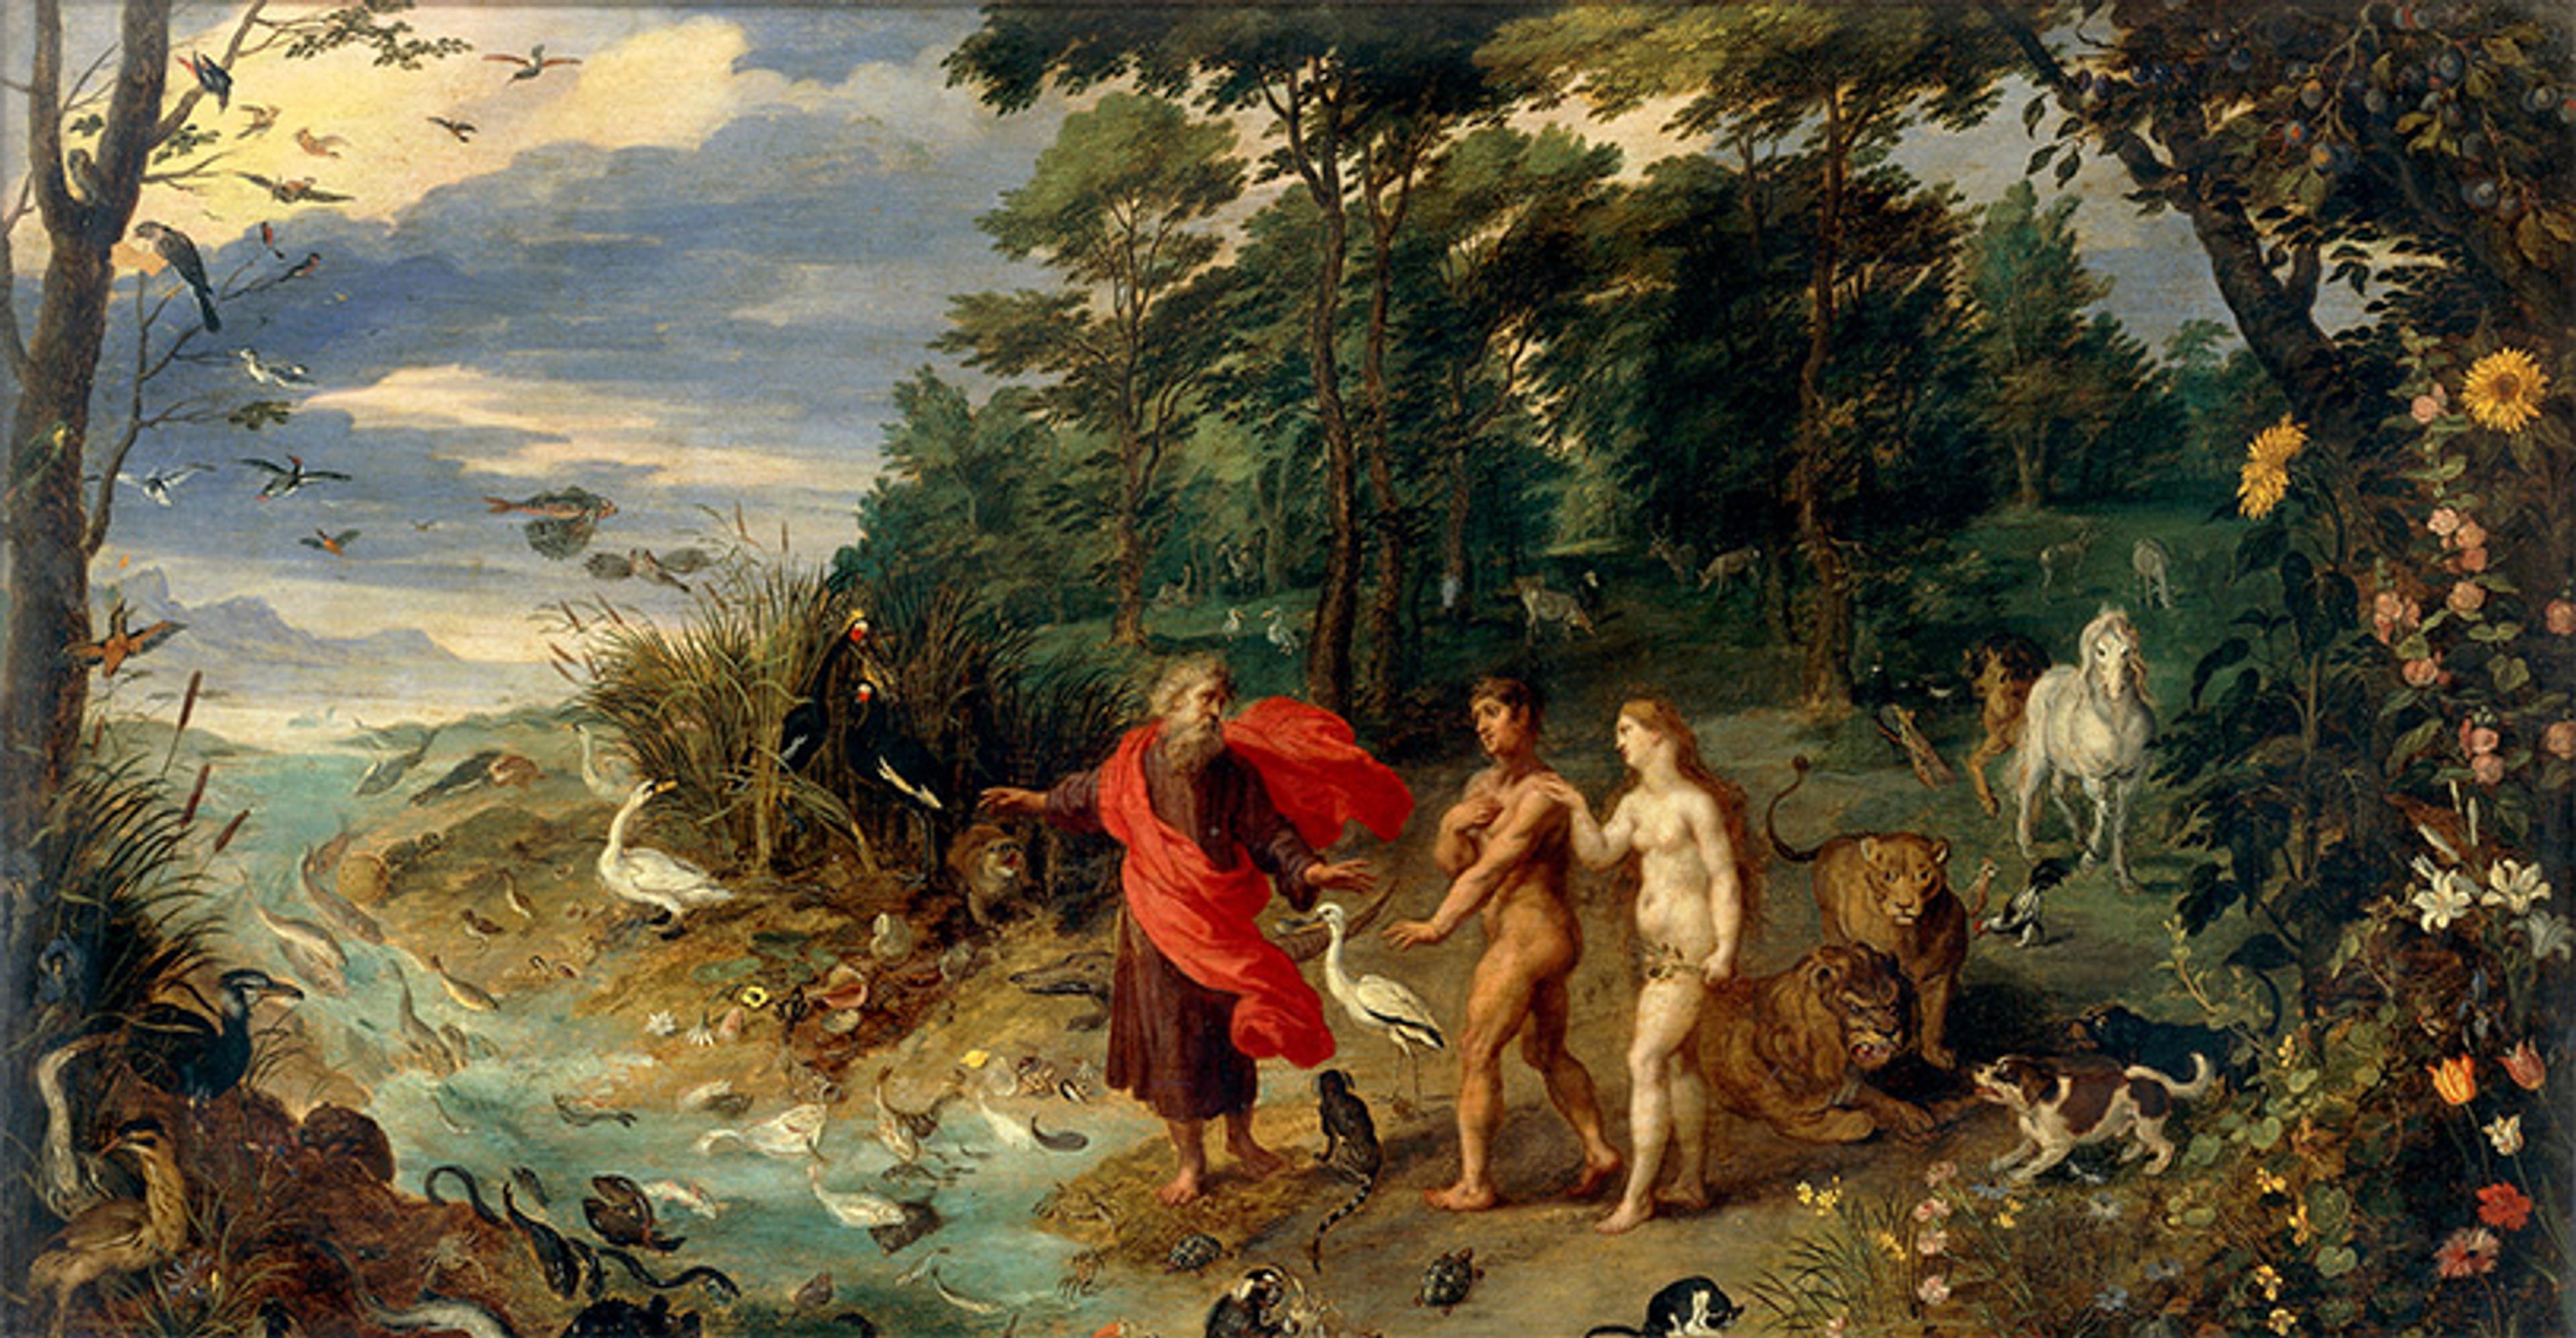 A painting depicting God with Adam and Eve in a lush landscape with various animals near a flowing river under a cloudy sky.